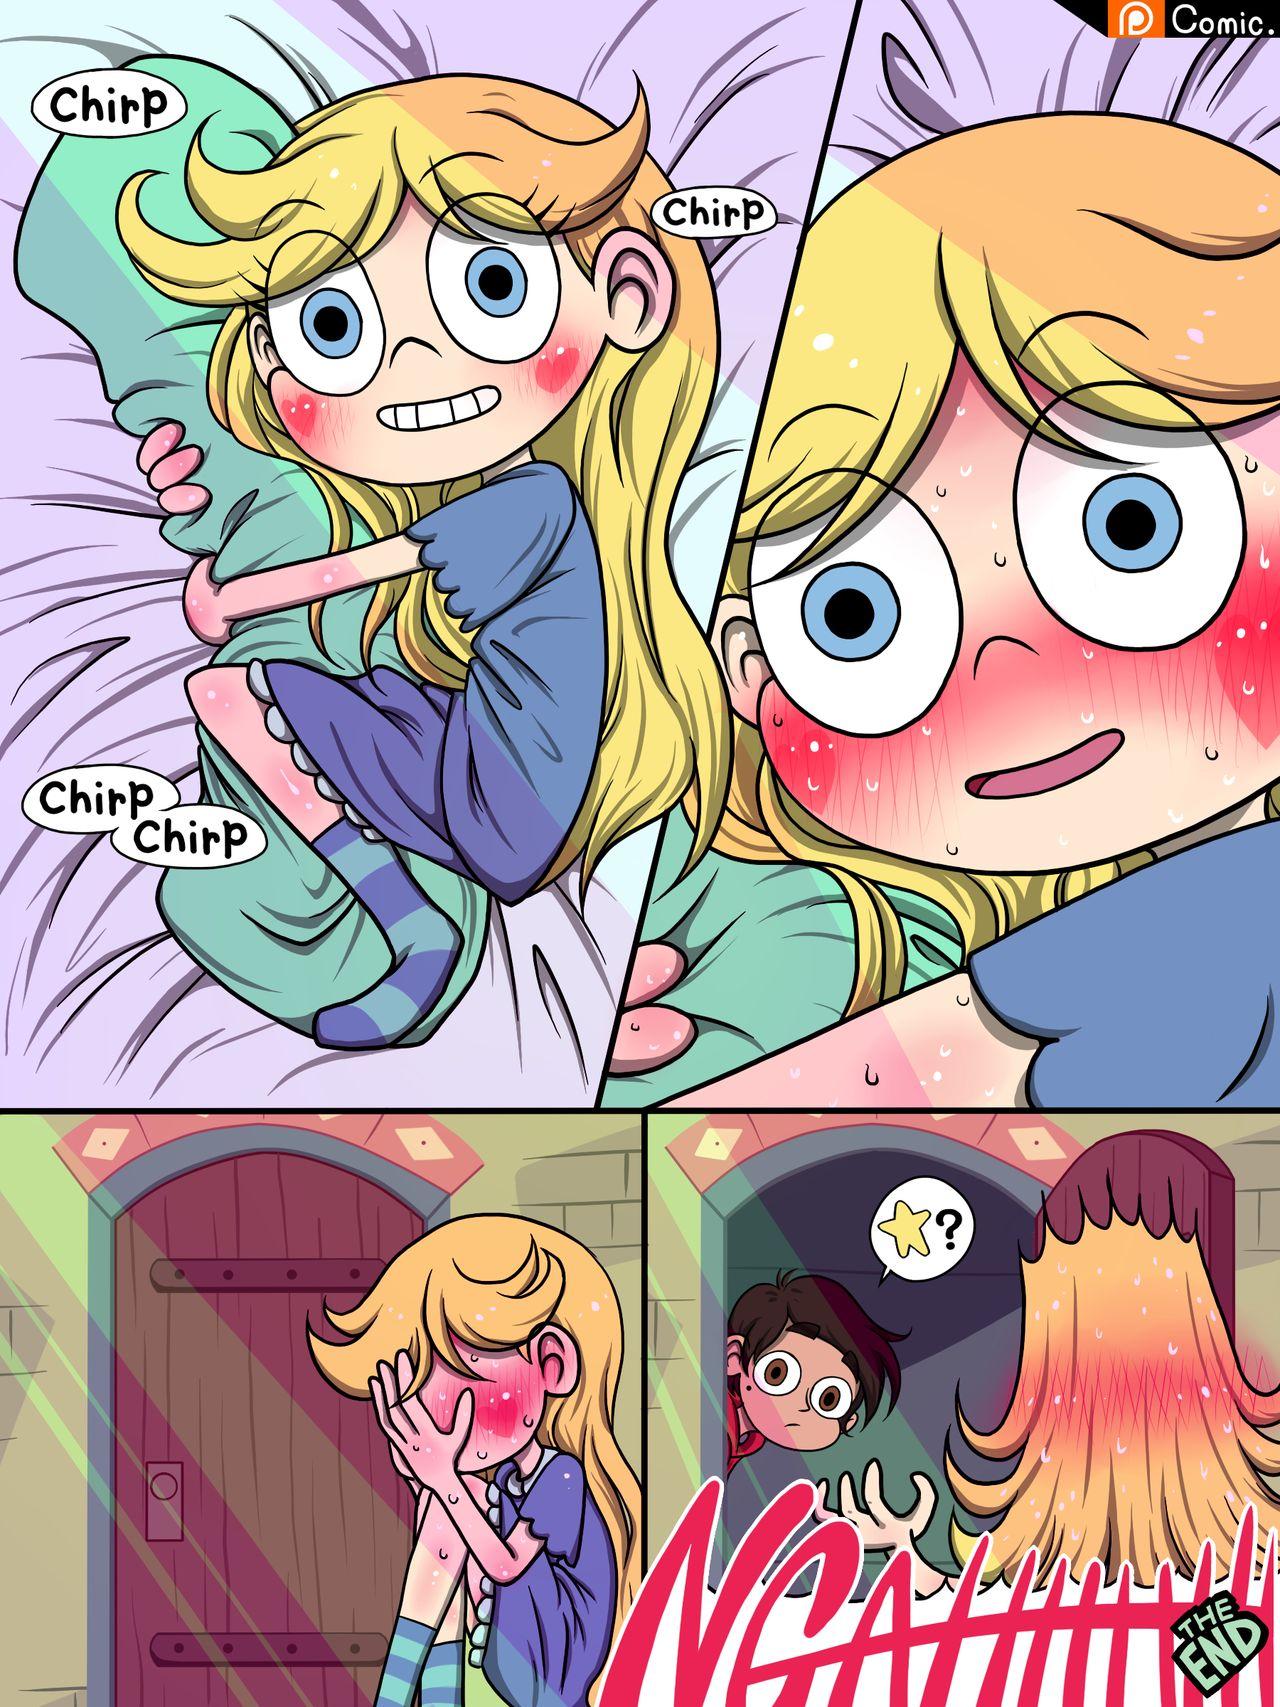 Virginity Foces of Dream - Star vs. the forces of evil Panocha - Page 8